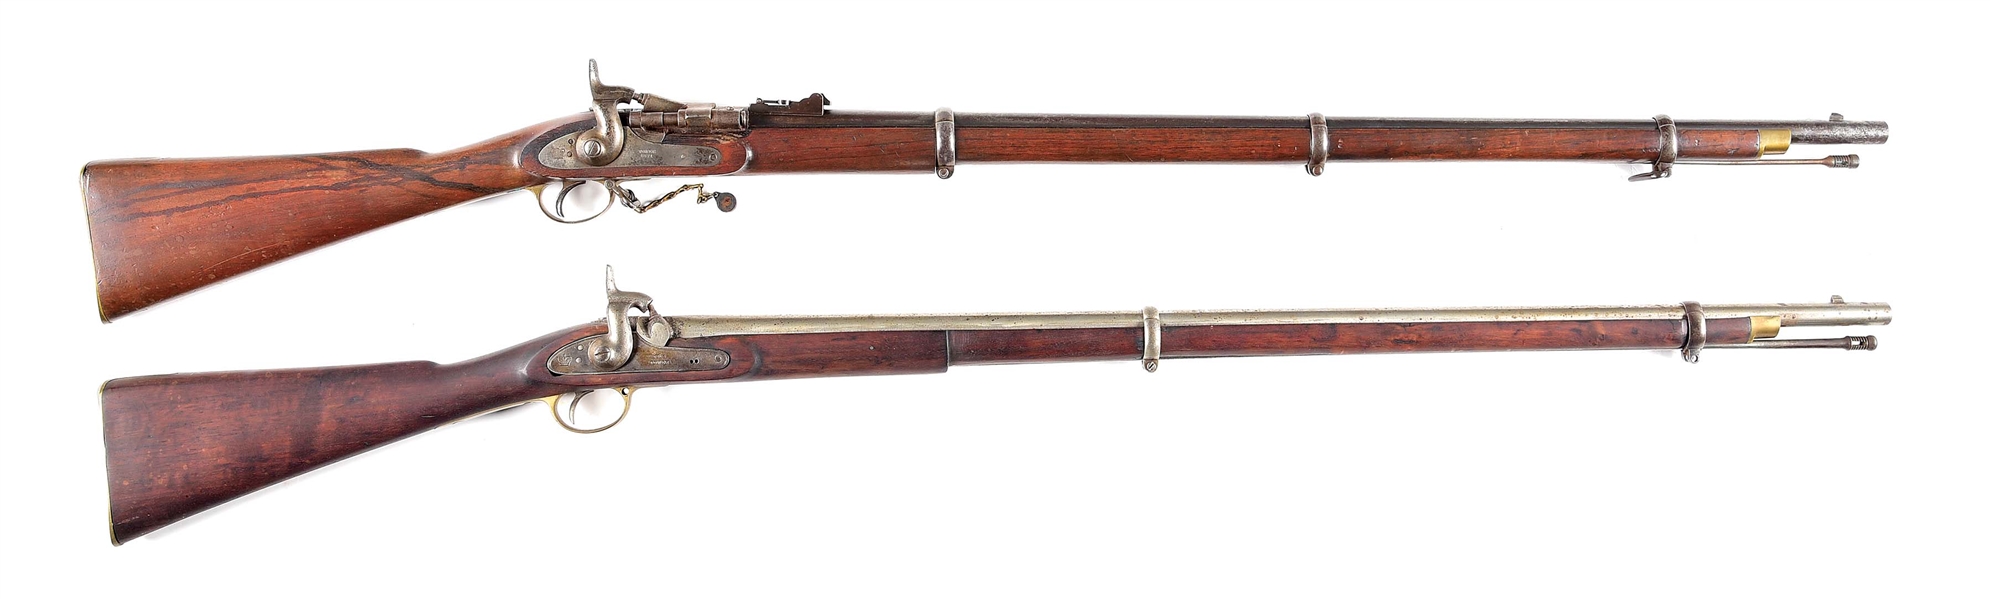 (A) LOT OF 2: ENFIELD RIFLES - MODEL 1853 AND SNIDER.